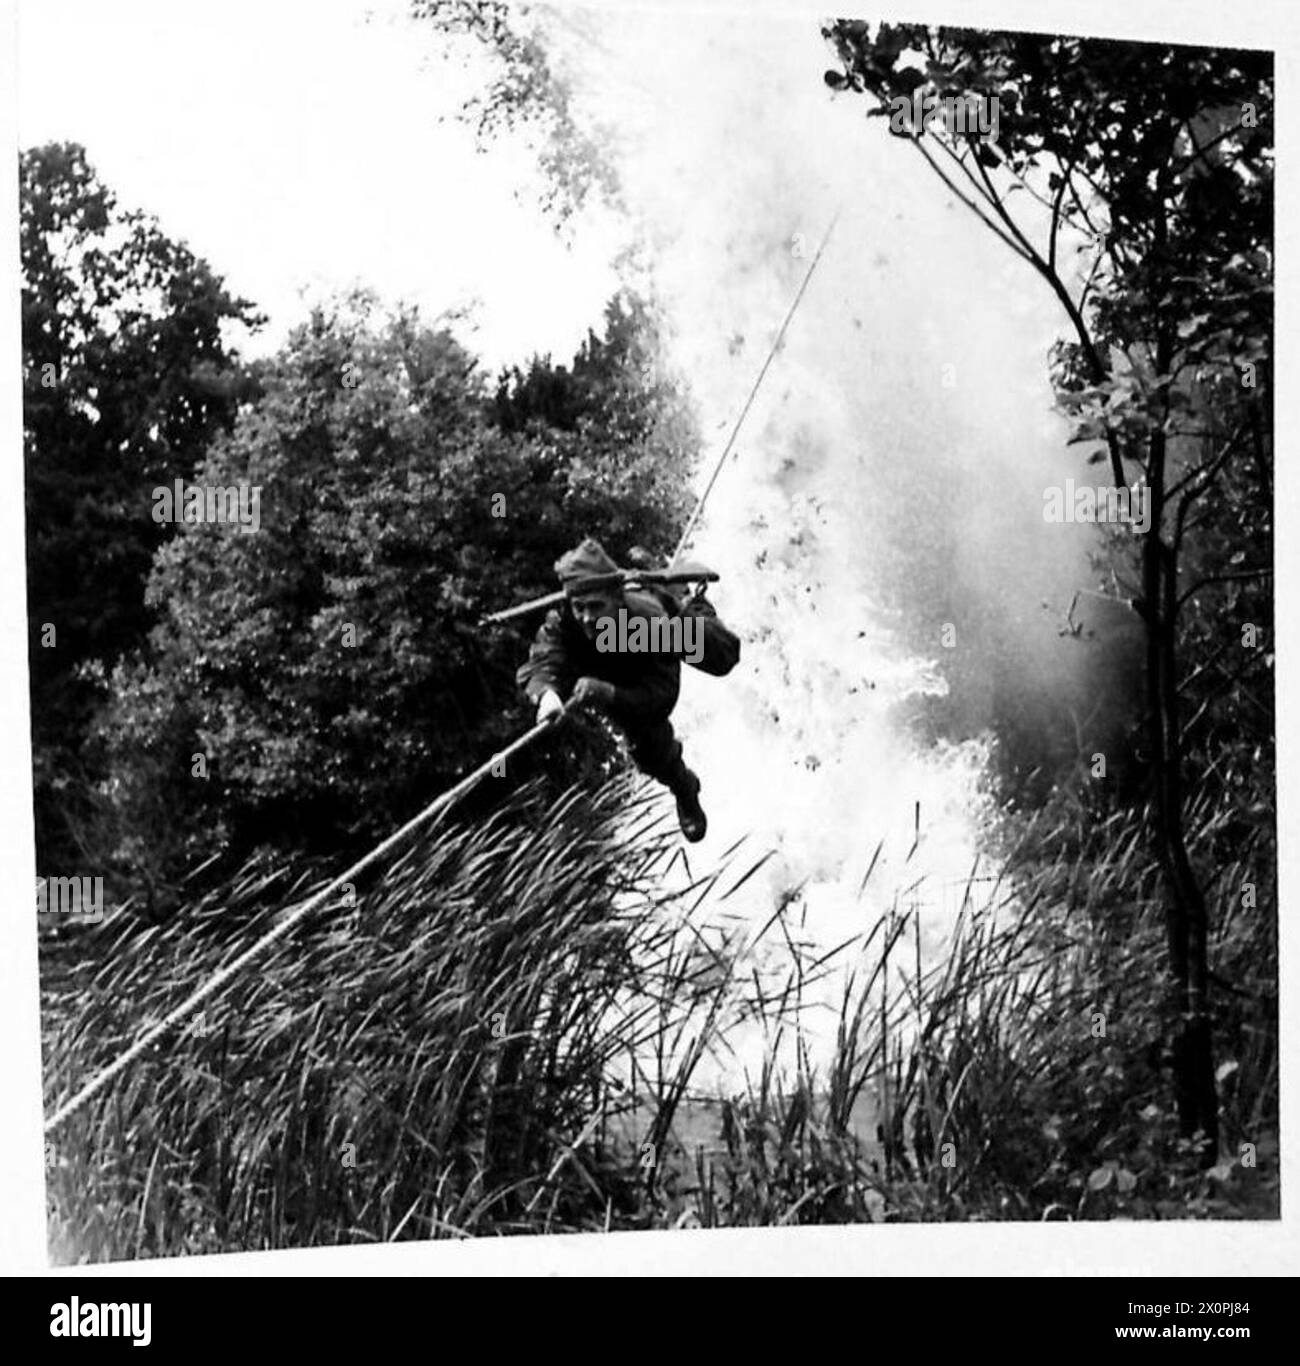 THE EAST YORKSHIRES TOUGHEN UP - The Death Slide : A soldier, with the aid of a Toggle-Rope, slides down a rope attached across a river under 'enemy fire'. Photographic negative , British Army Stock Photo